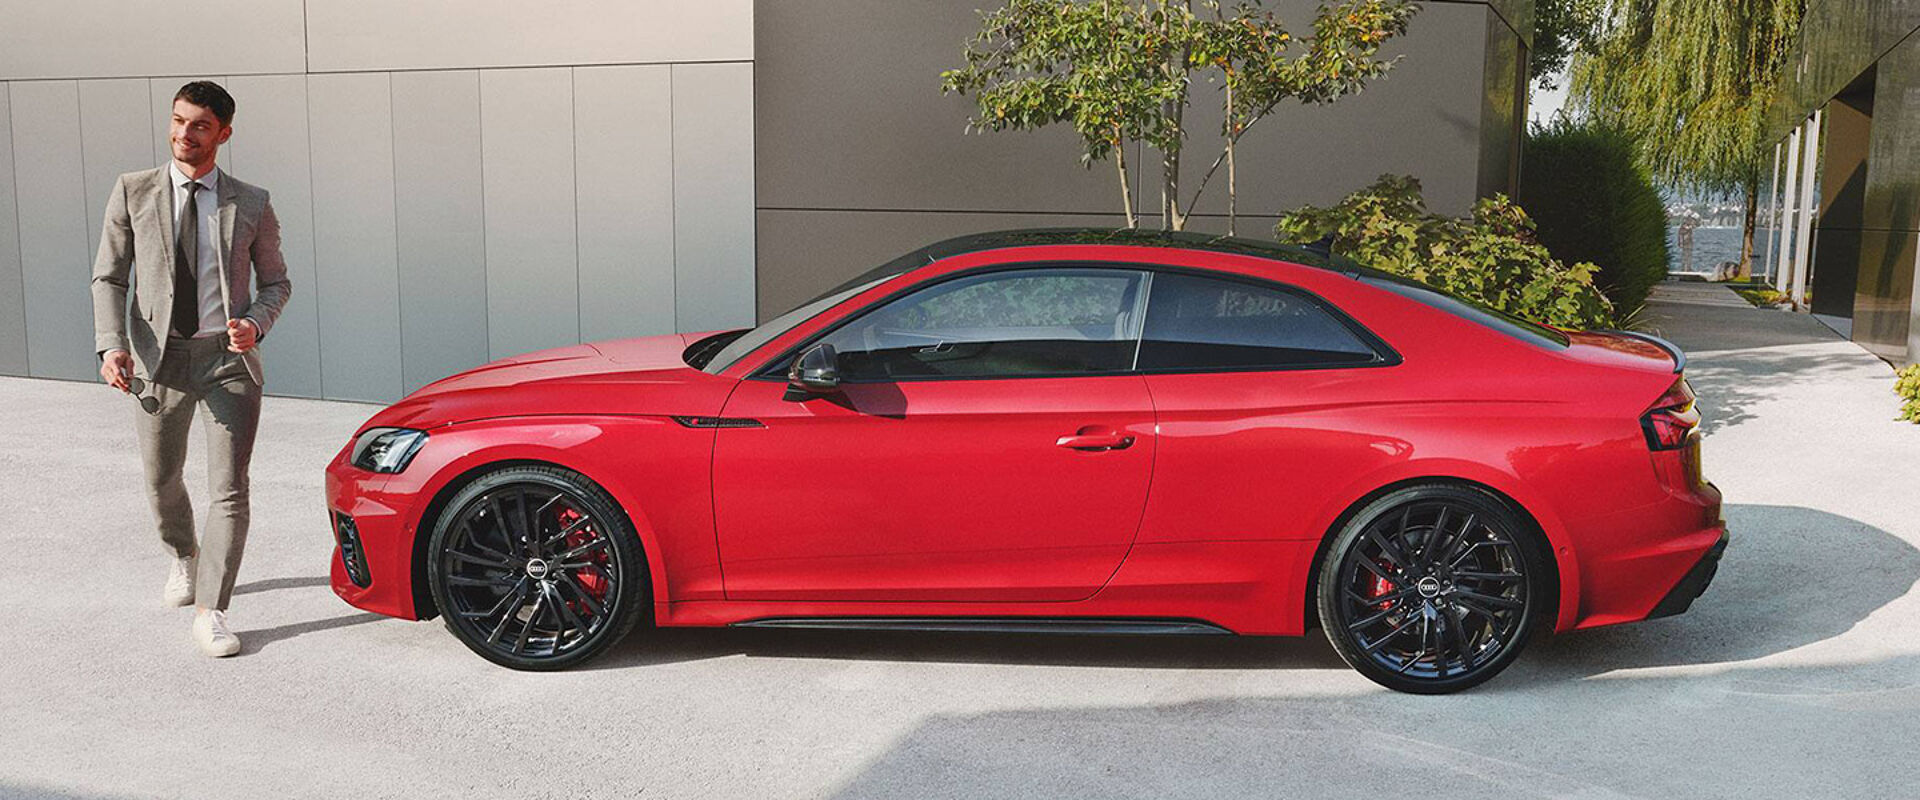 Header-rs5-coupe.jpg